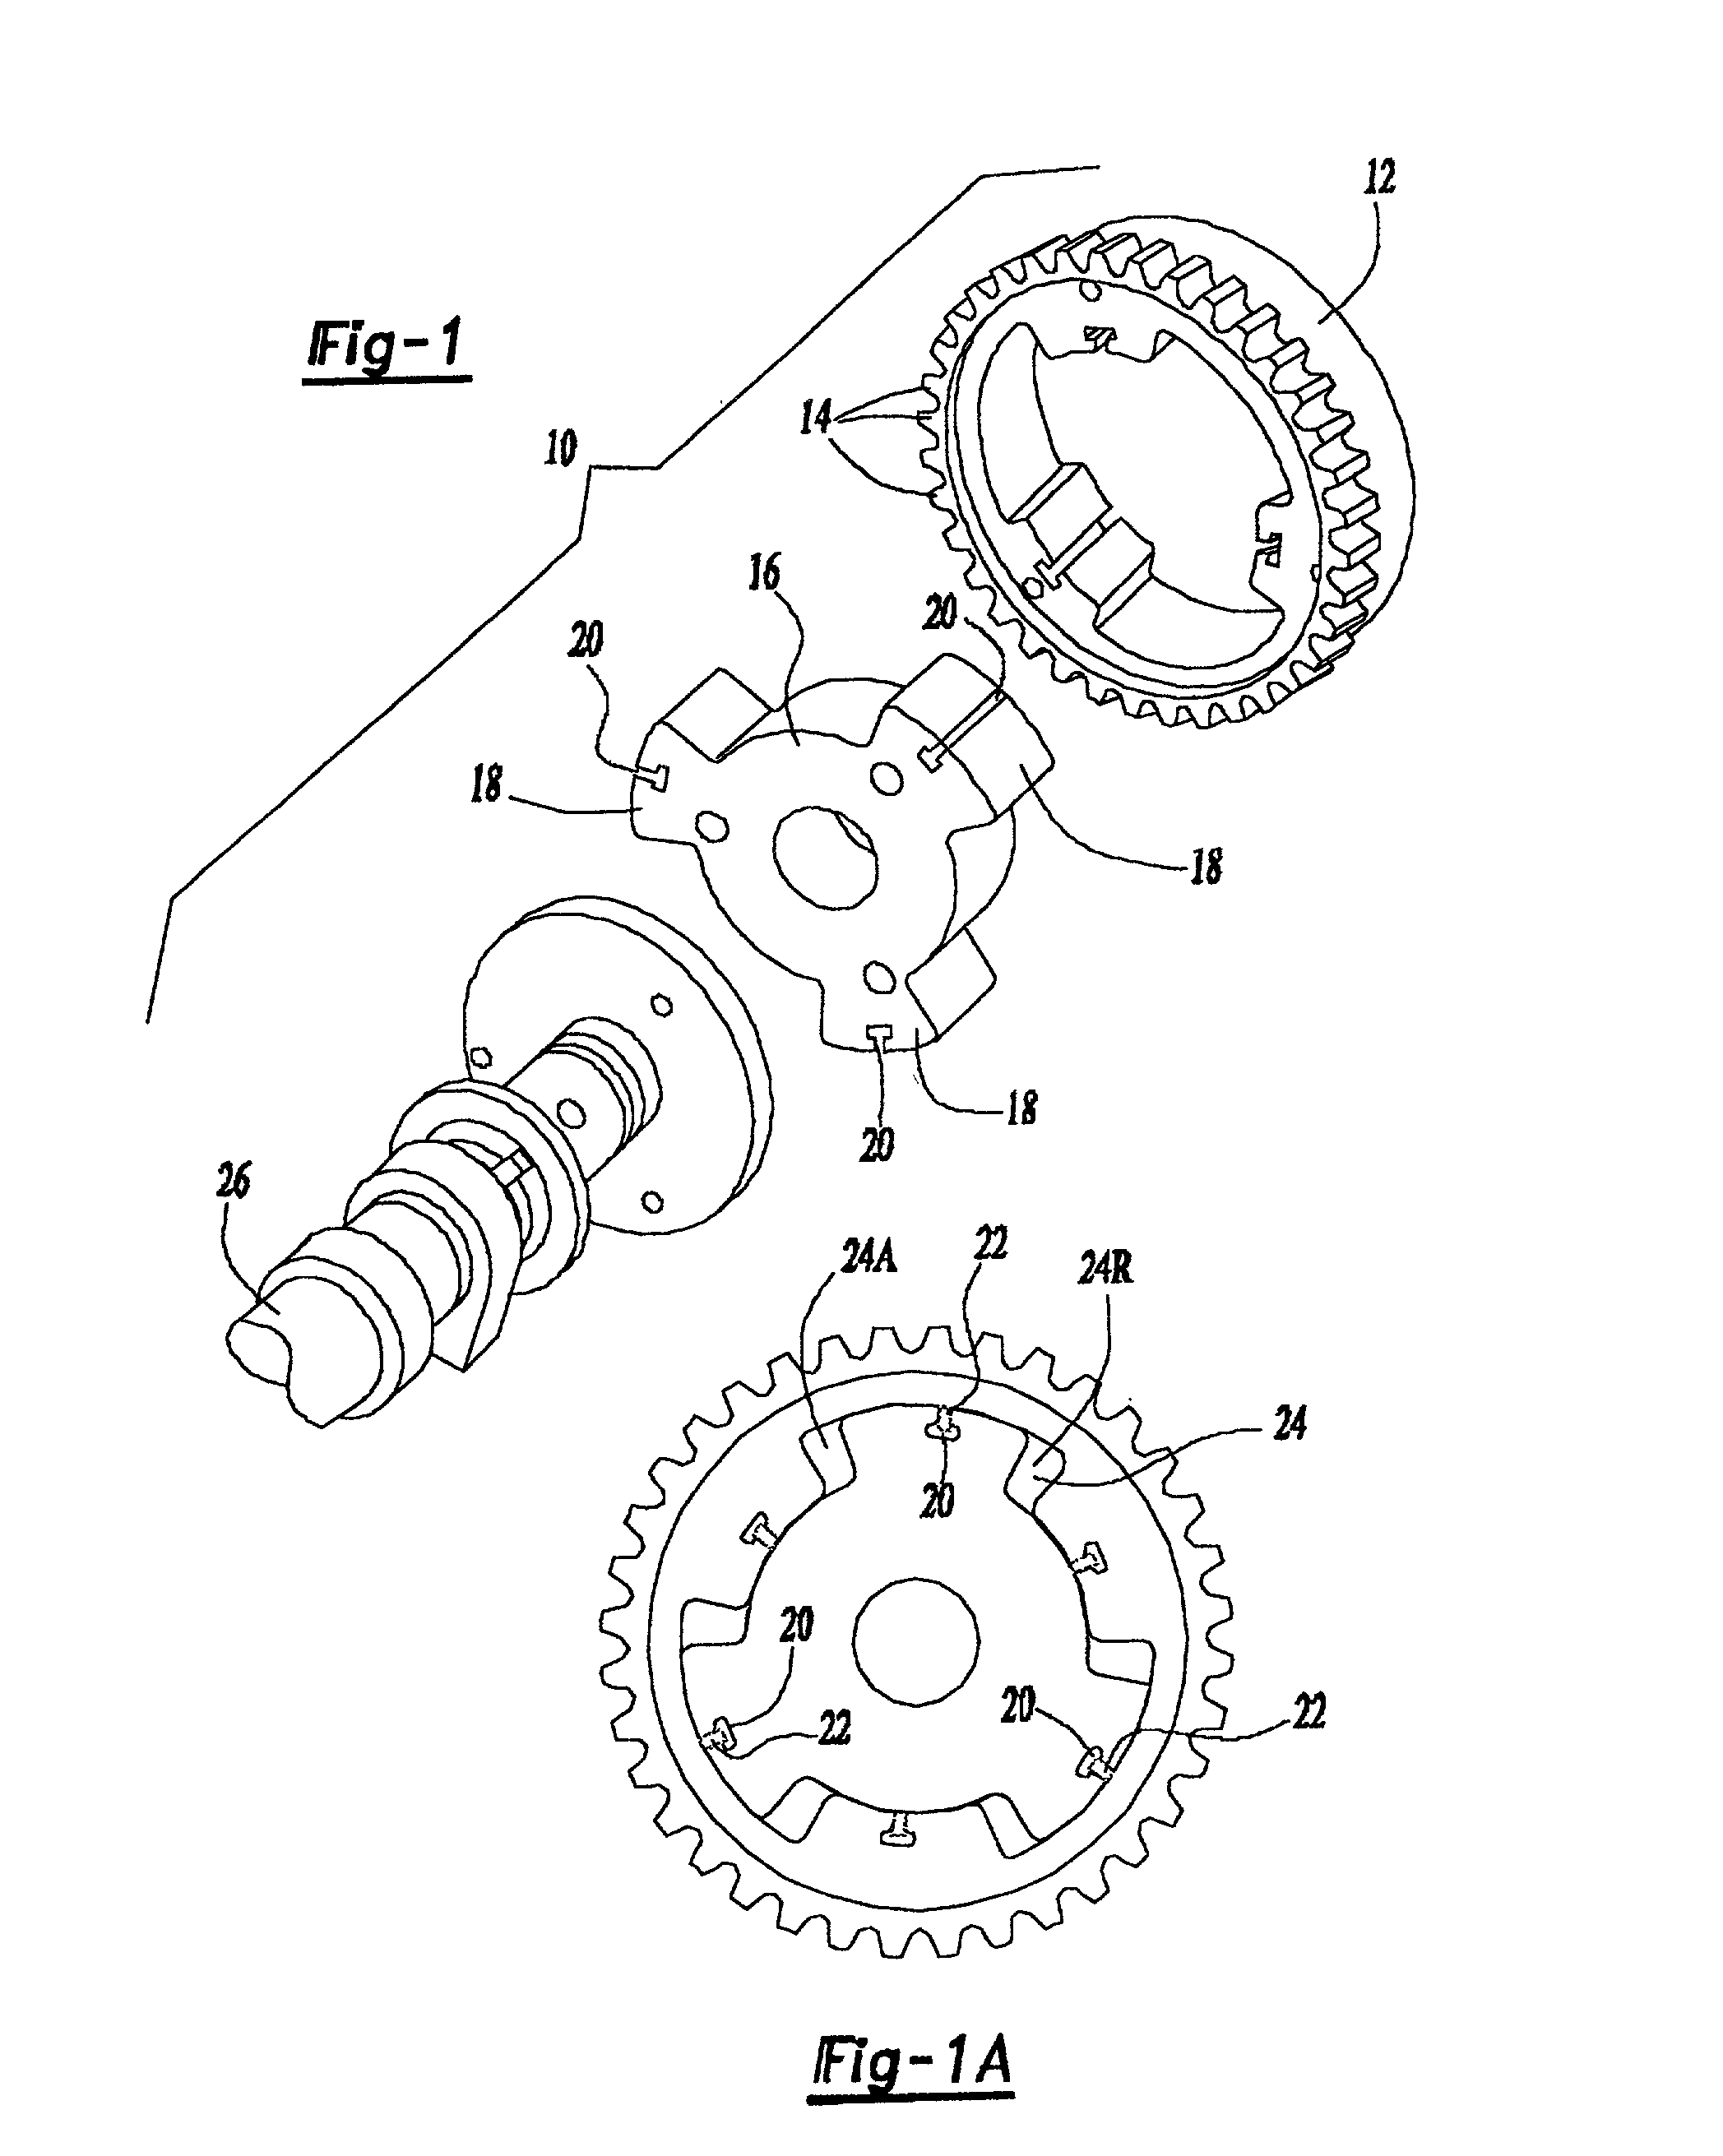 Multi-mode control system for variable camshaft timing devices